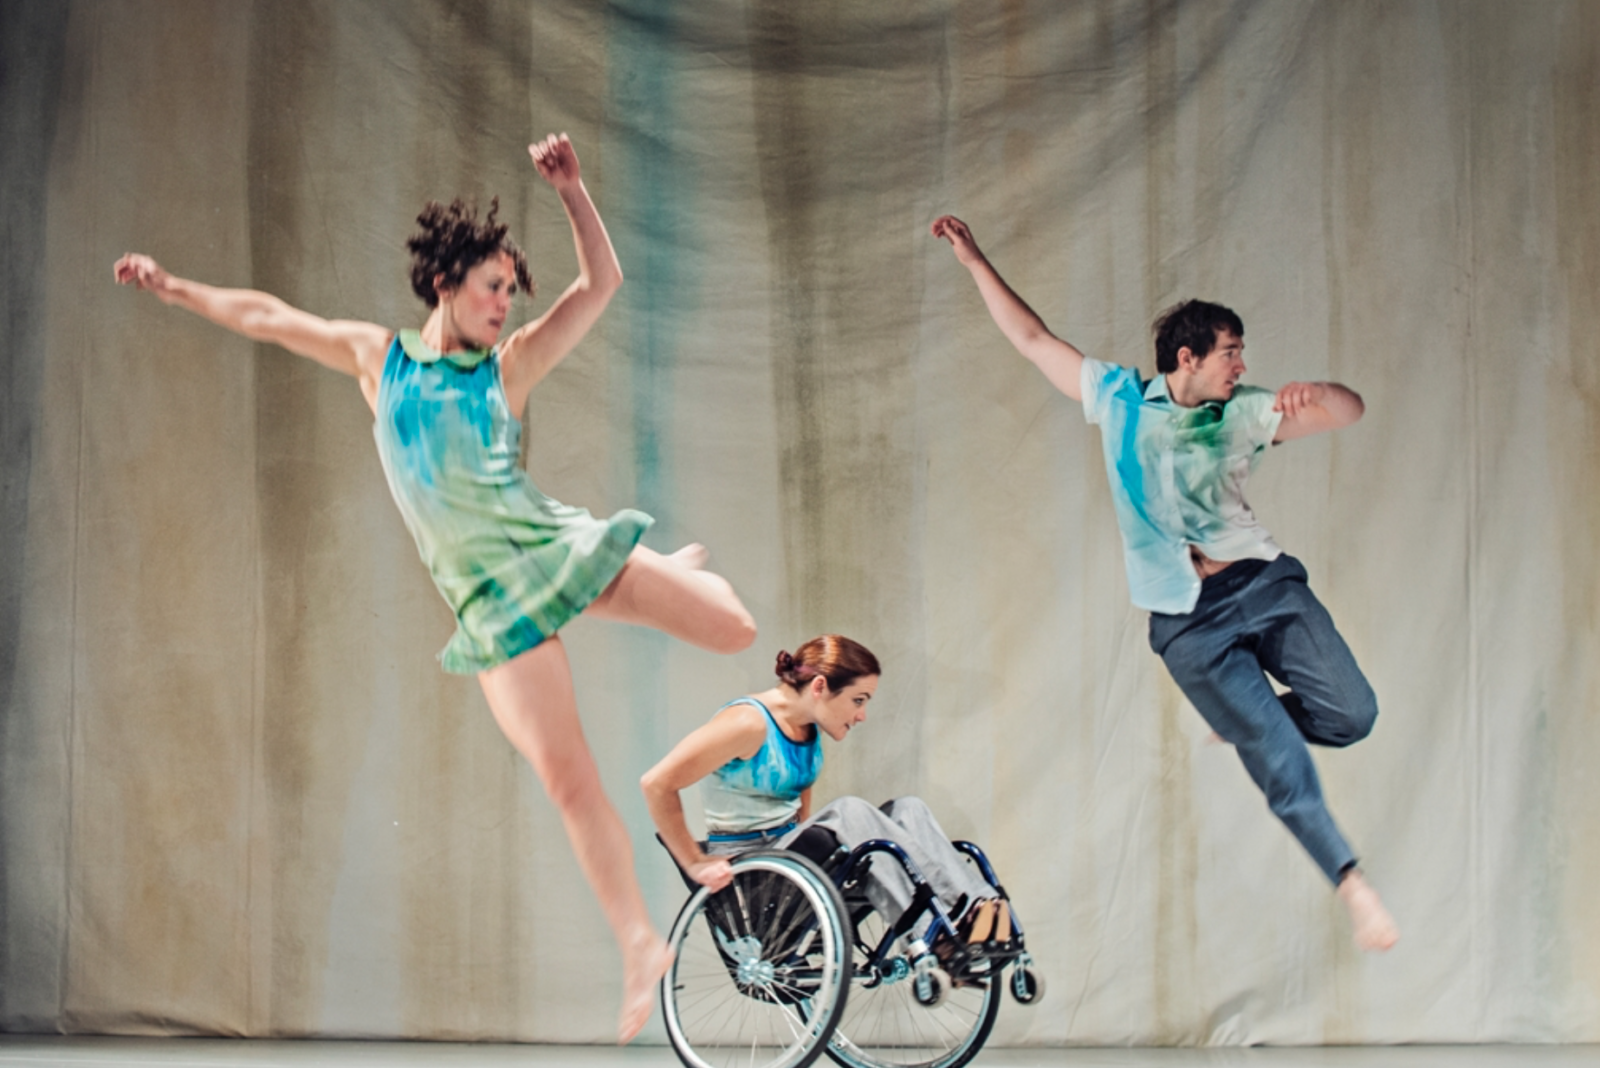 Three dancers performing on stage, two of the dancers are captured mid movement leaping into the air whilst the third dancer is balancing in a wheelie position in their wheelchair.